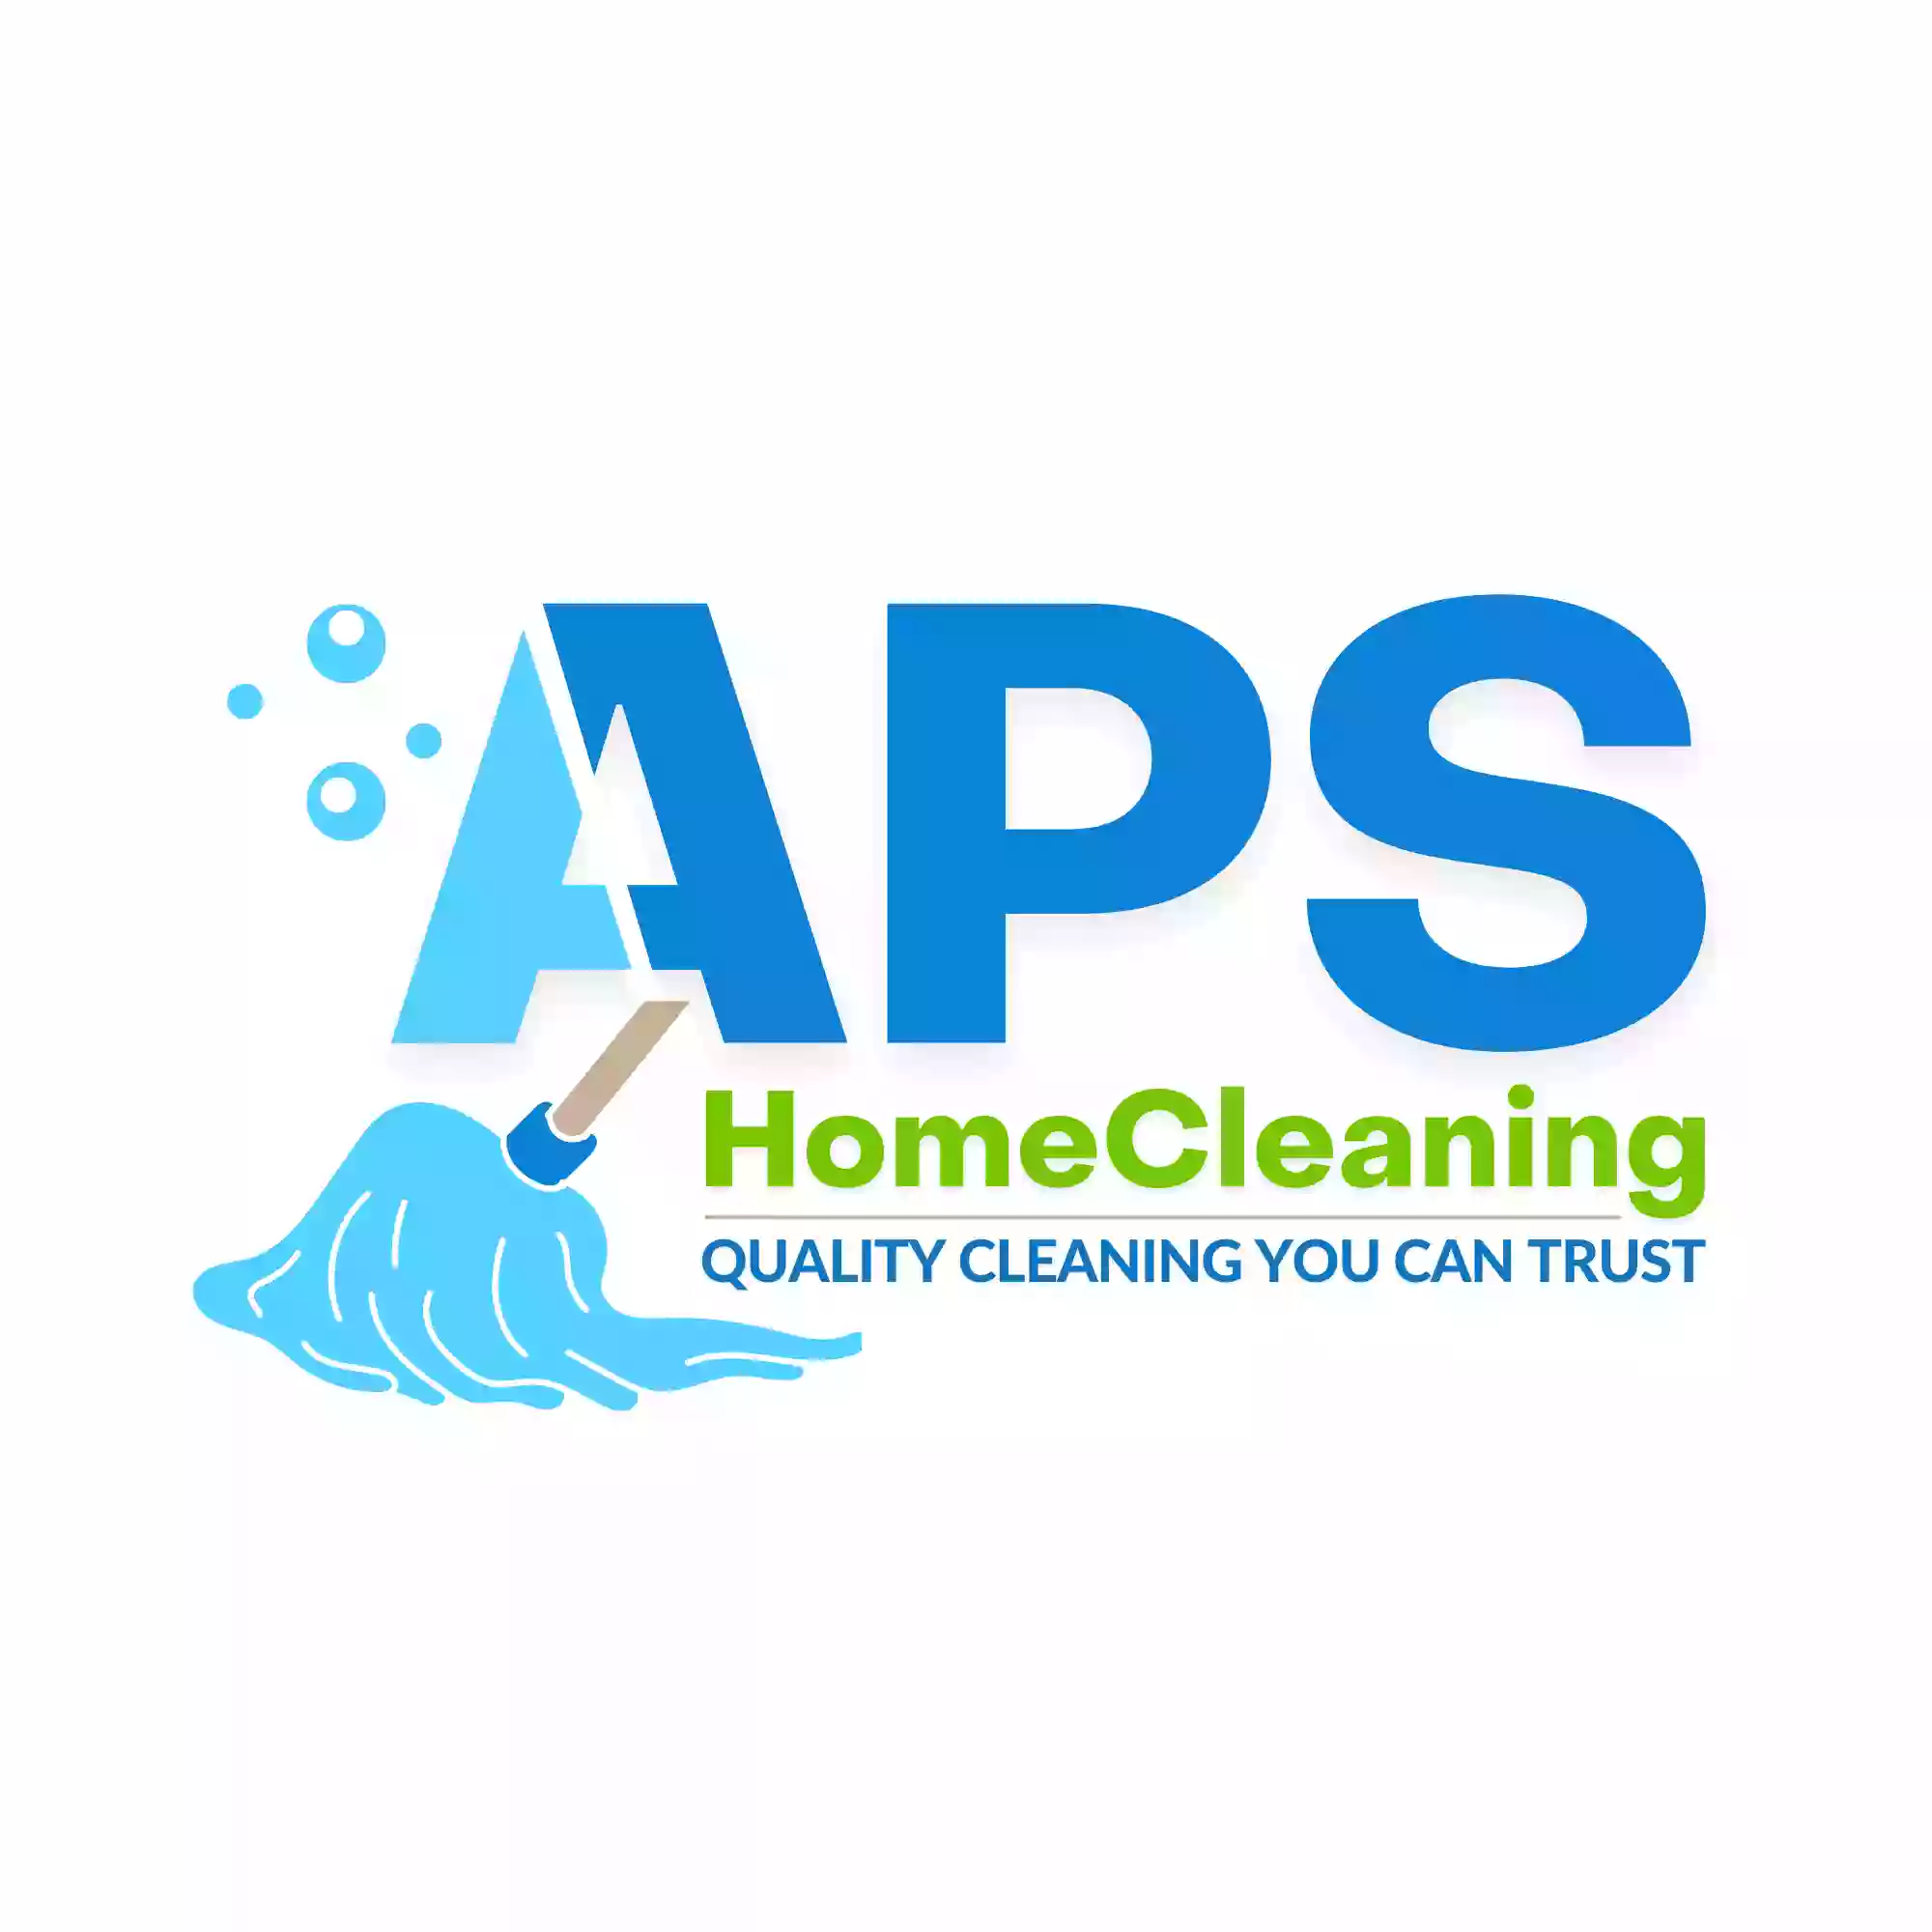 APS Home Cleaning Services | House Cleaning | Maid Services, Move In, Move Out and Deep Cleaning Fairfax, VA